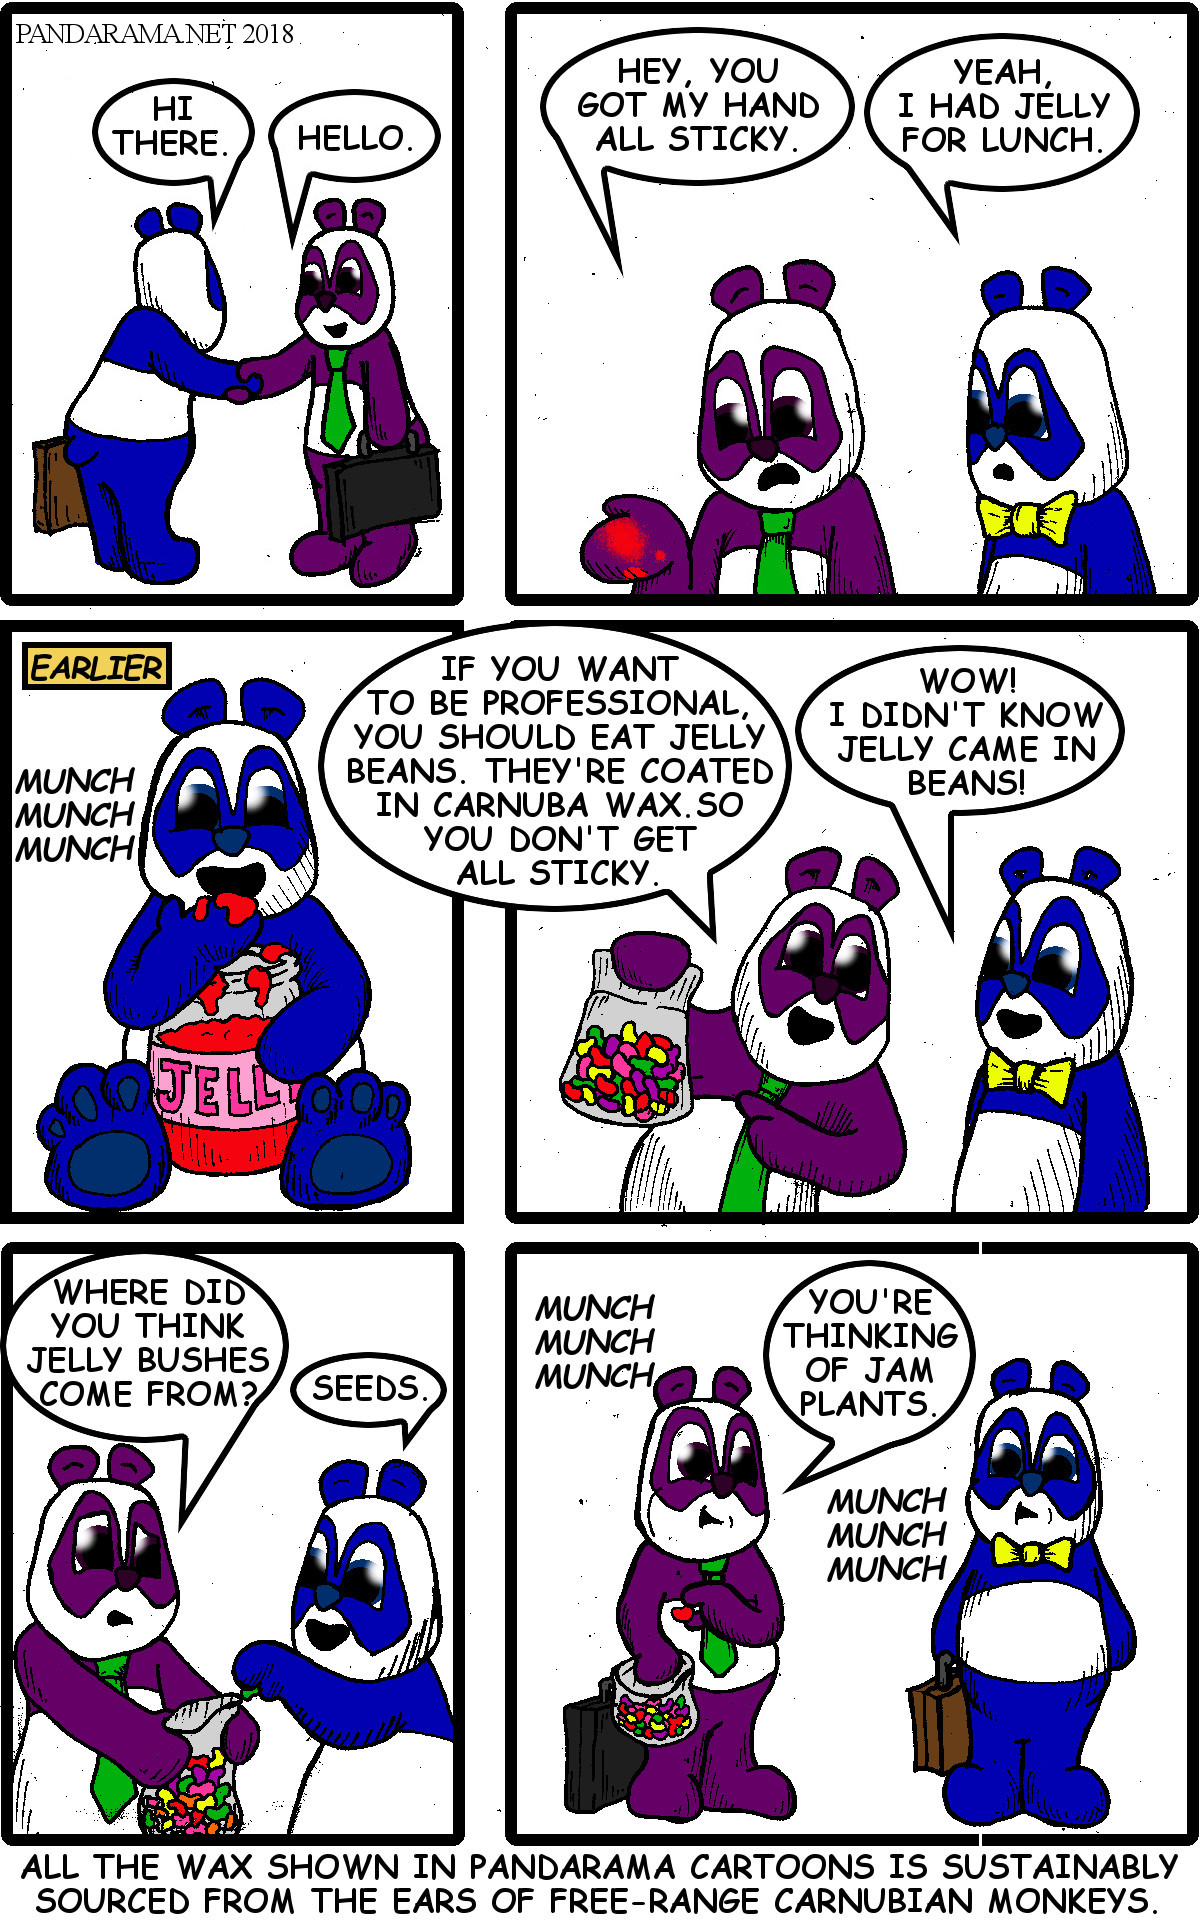 a cartoon where panda learns that jelly beans don't get your hand sticky like eating jelly.